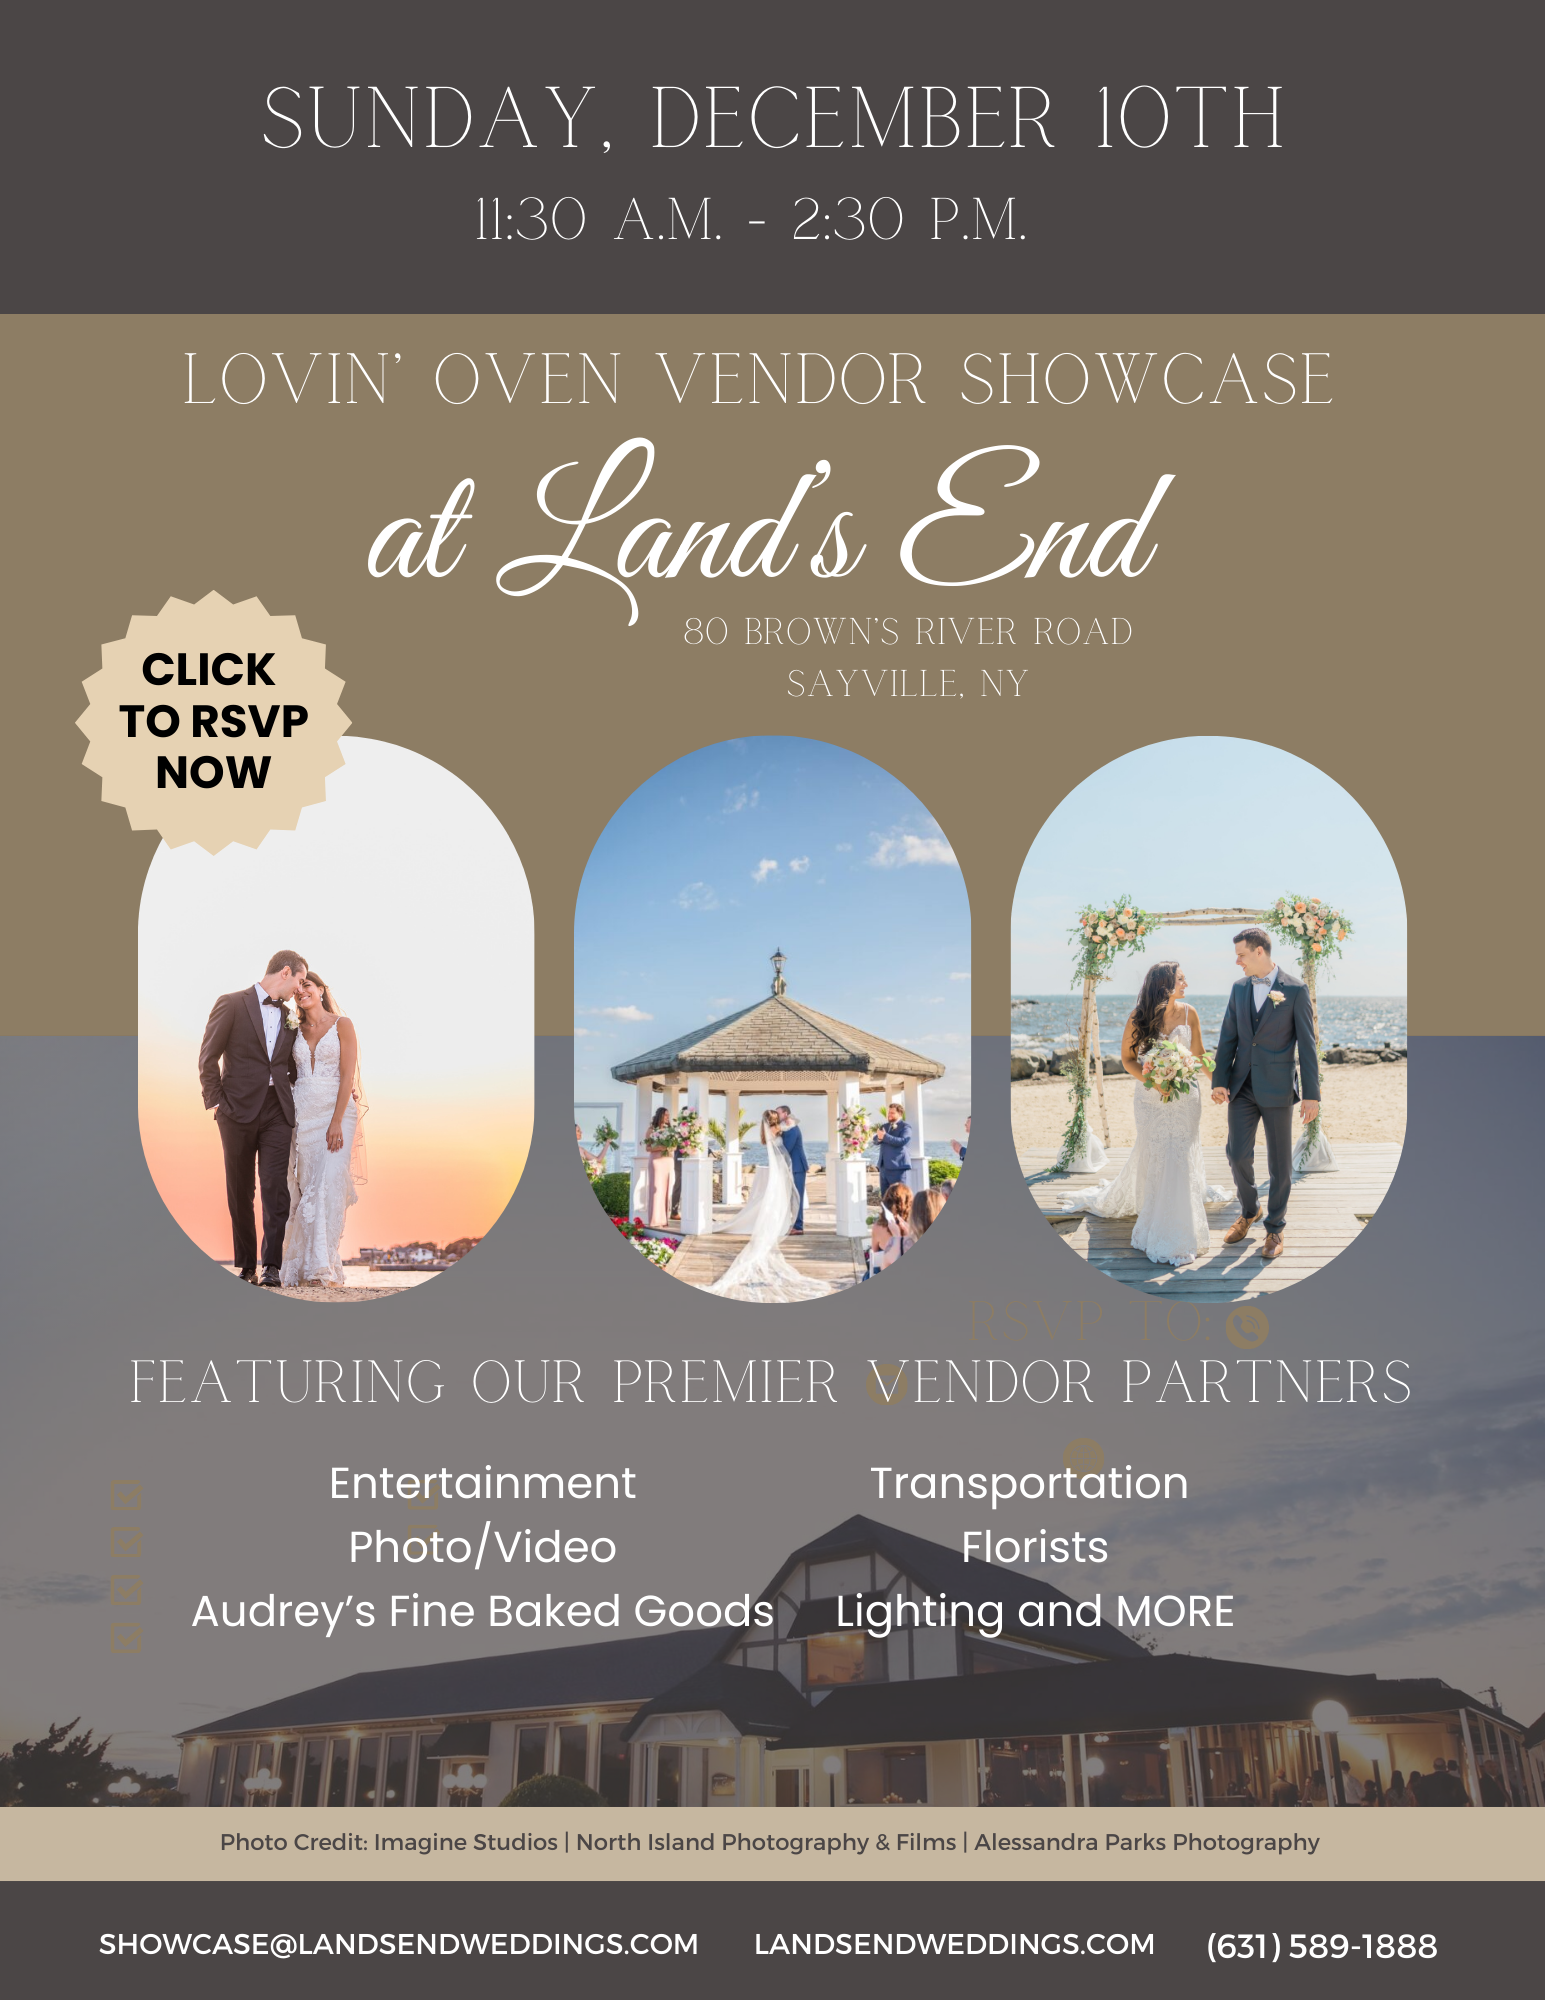 IMG: New Years at Land's End, Call for details